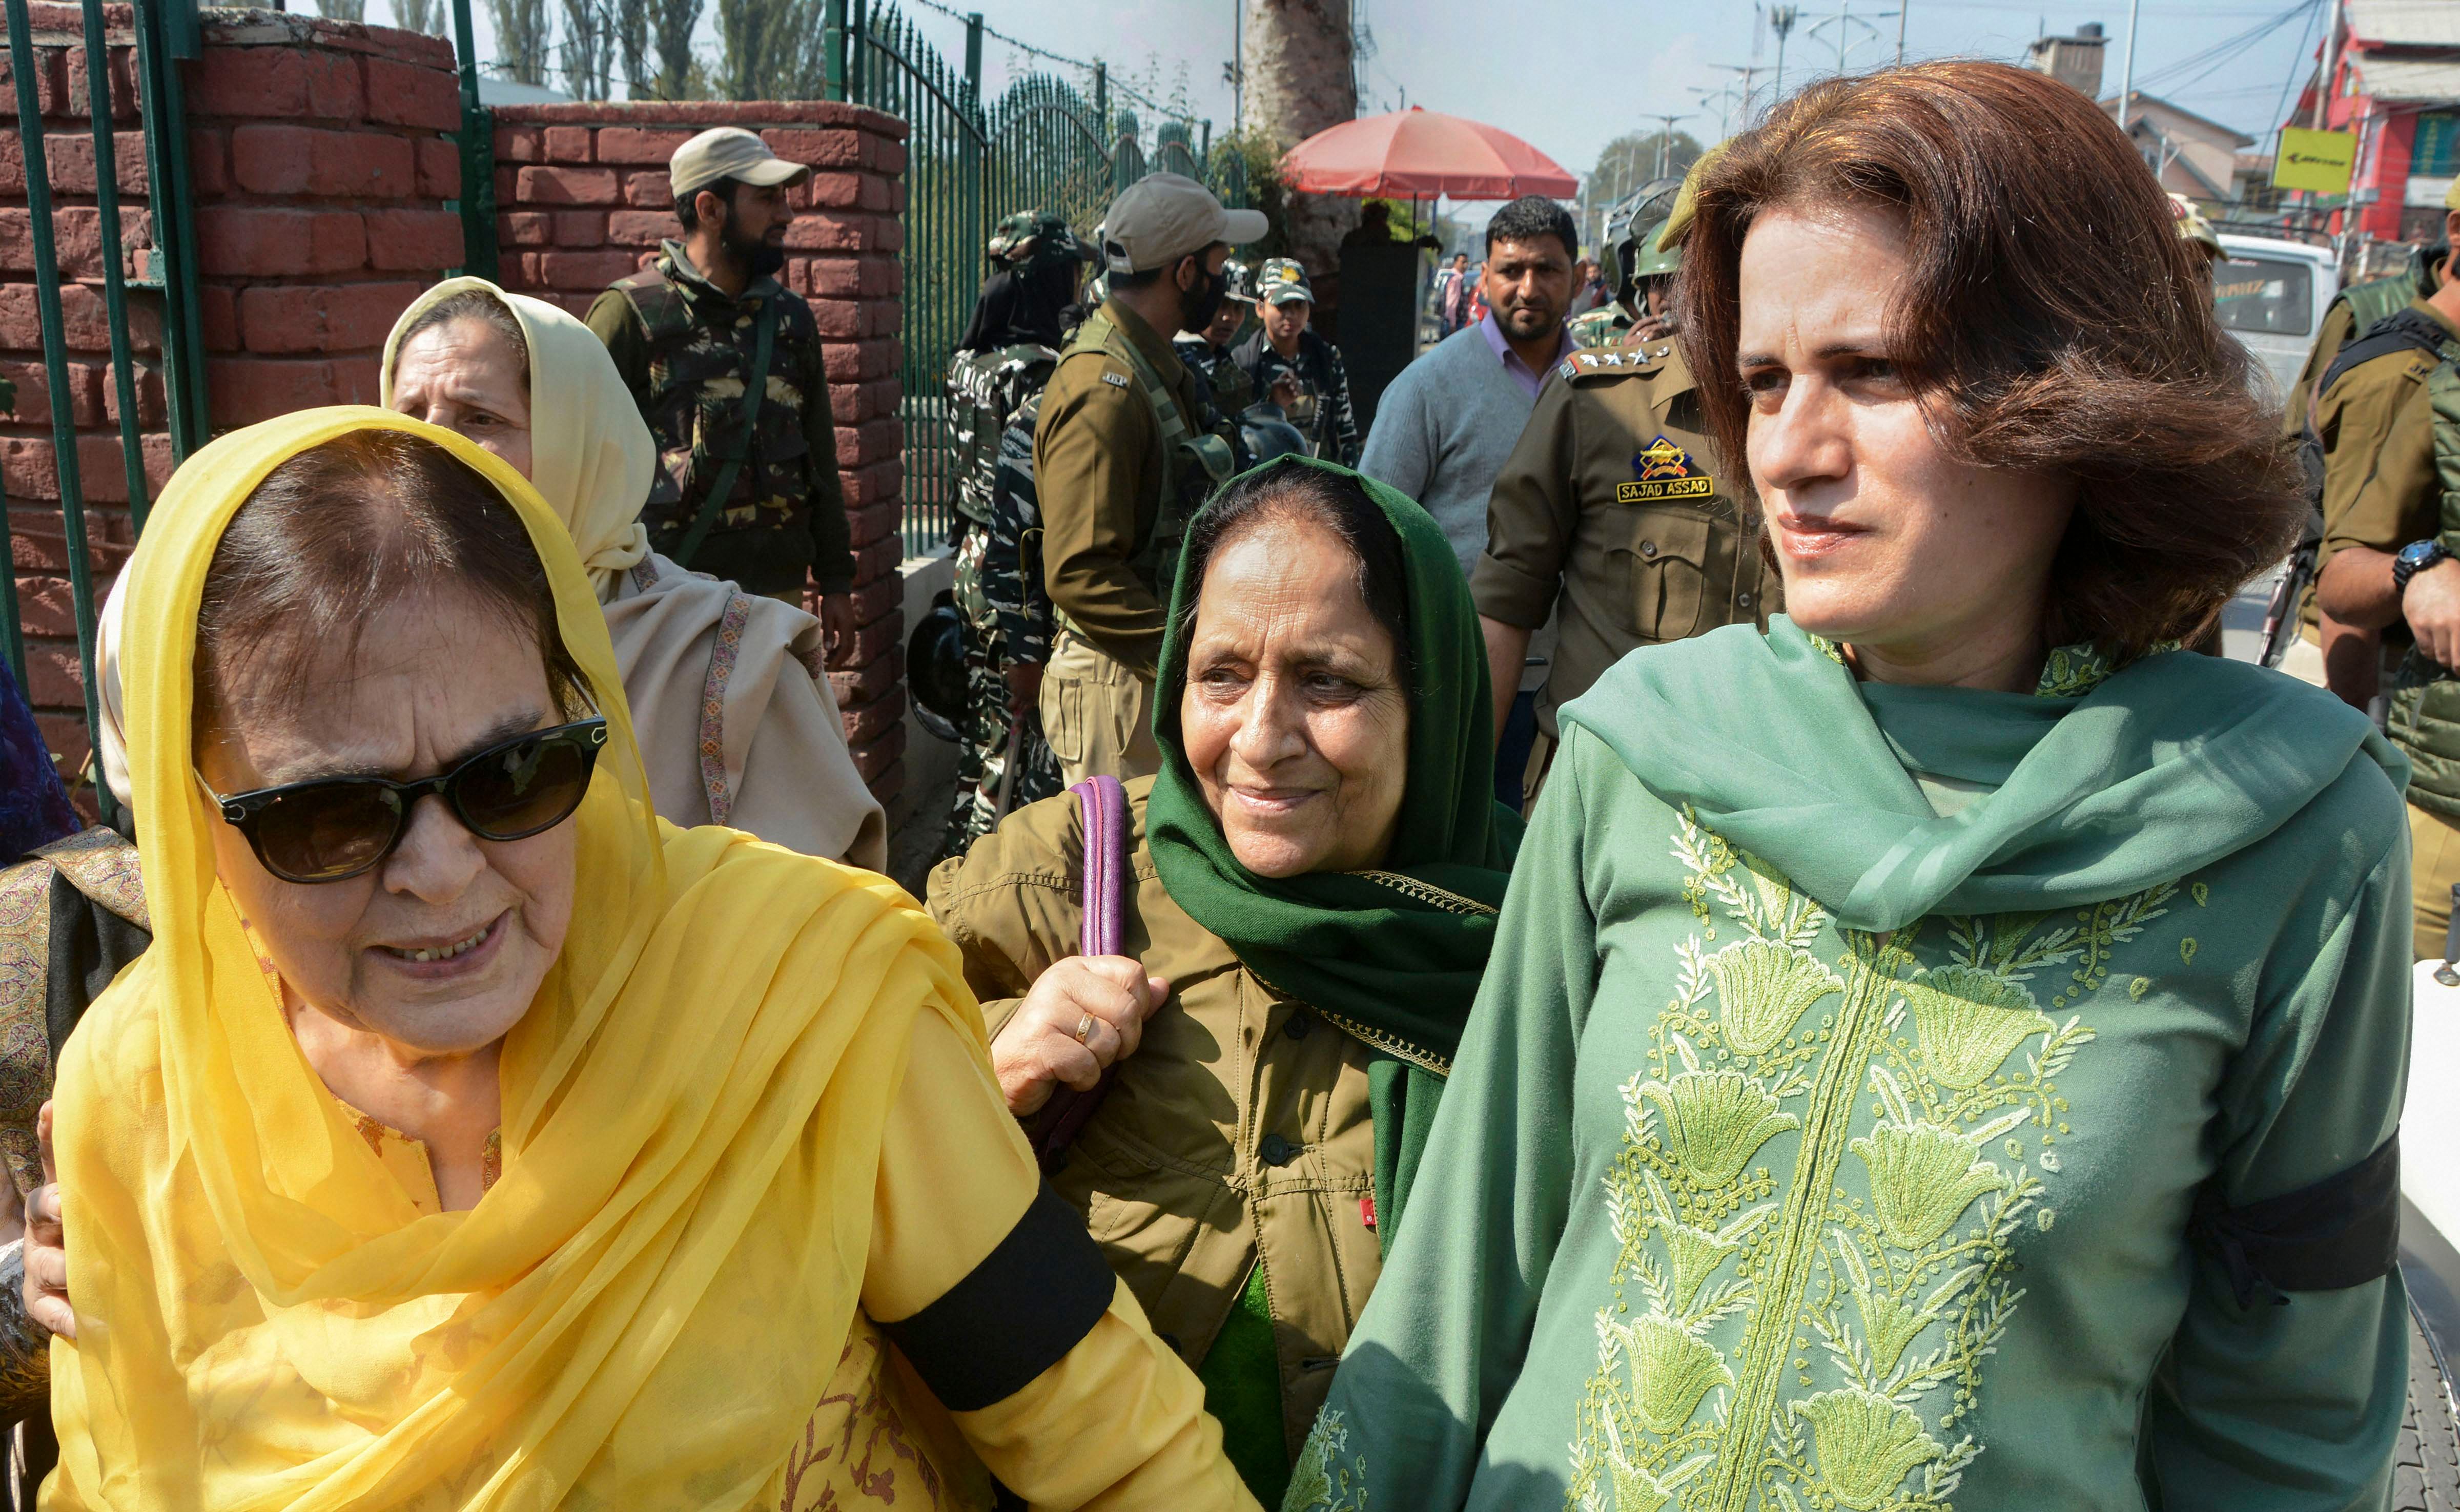 Sister Suriya Abdullah and daughter Safiyah Abdullah of Member of Parliament Farooq Abdullah, during a protest against the abrogration of Article 370A and bifurcation of J &K State, on the 73rd day of strike, in Srinagar. (PTI Photo)